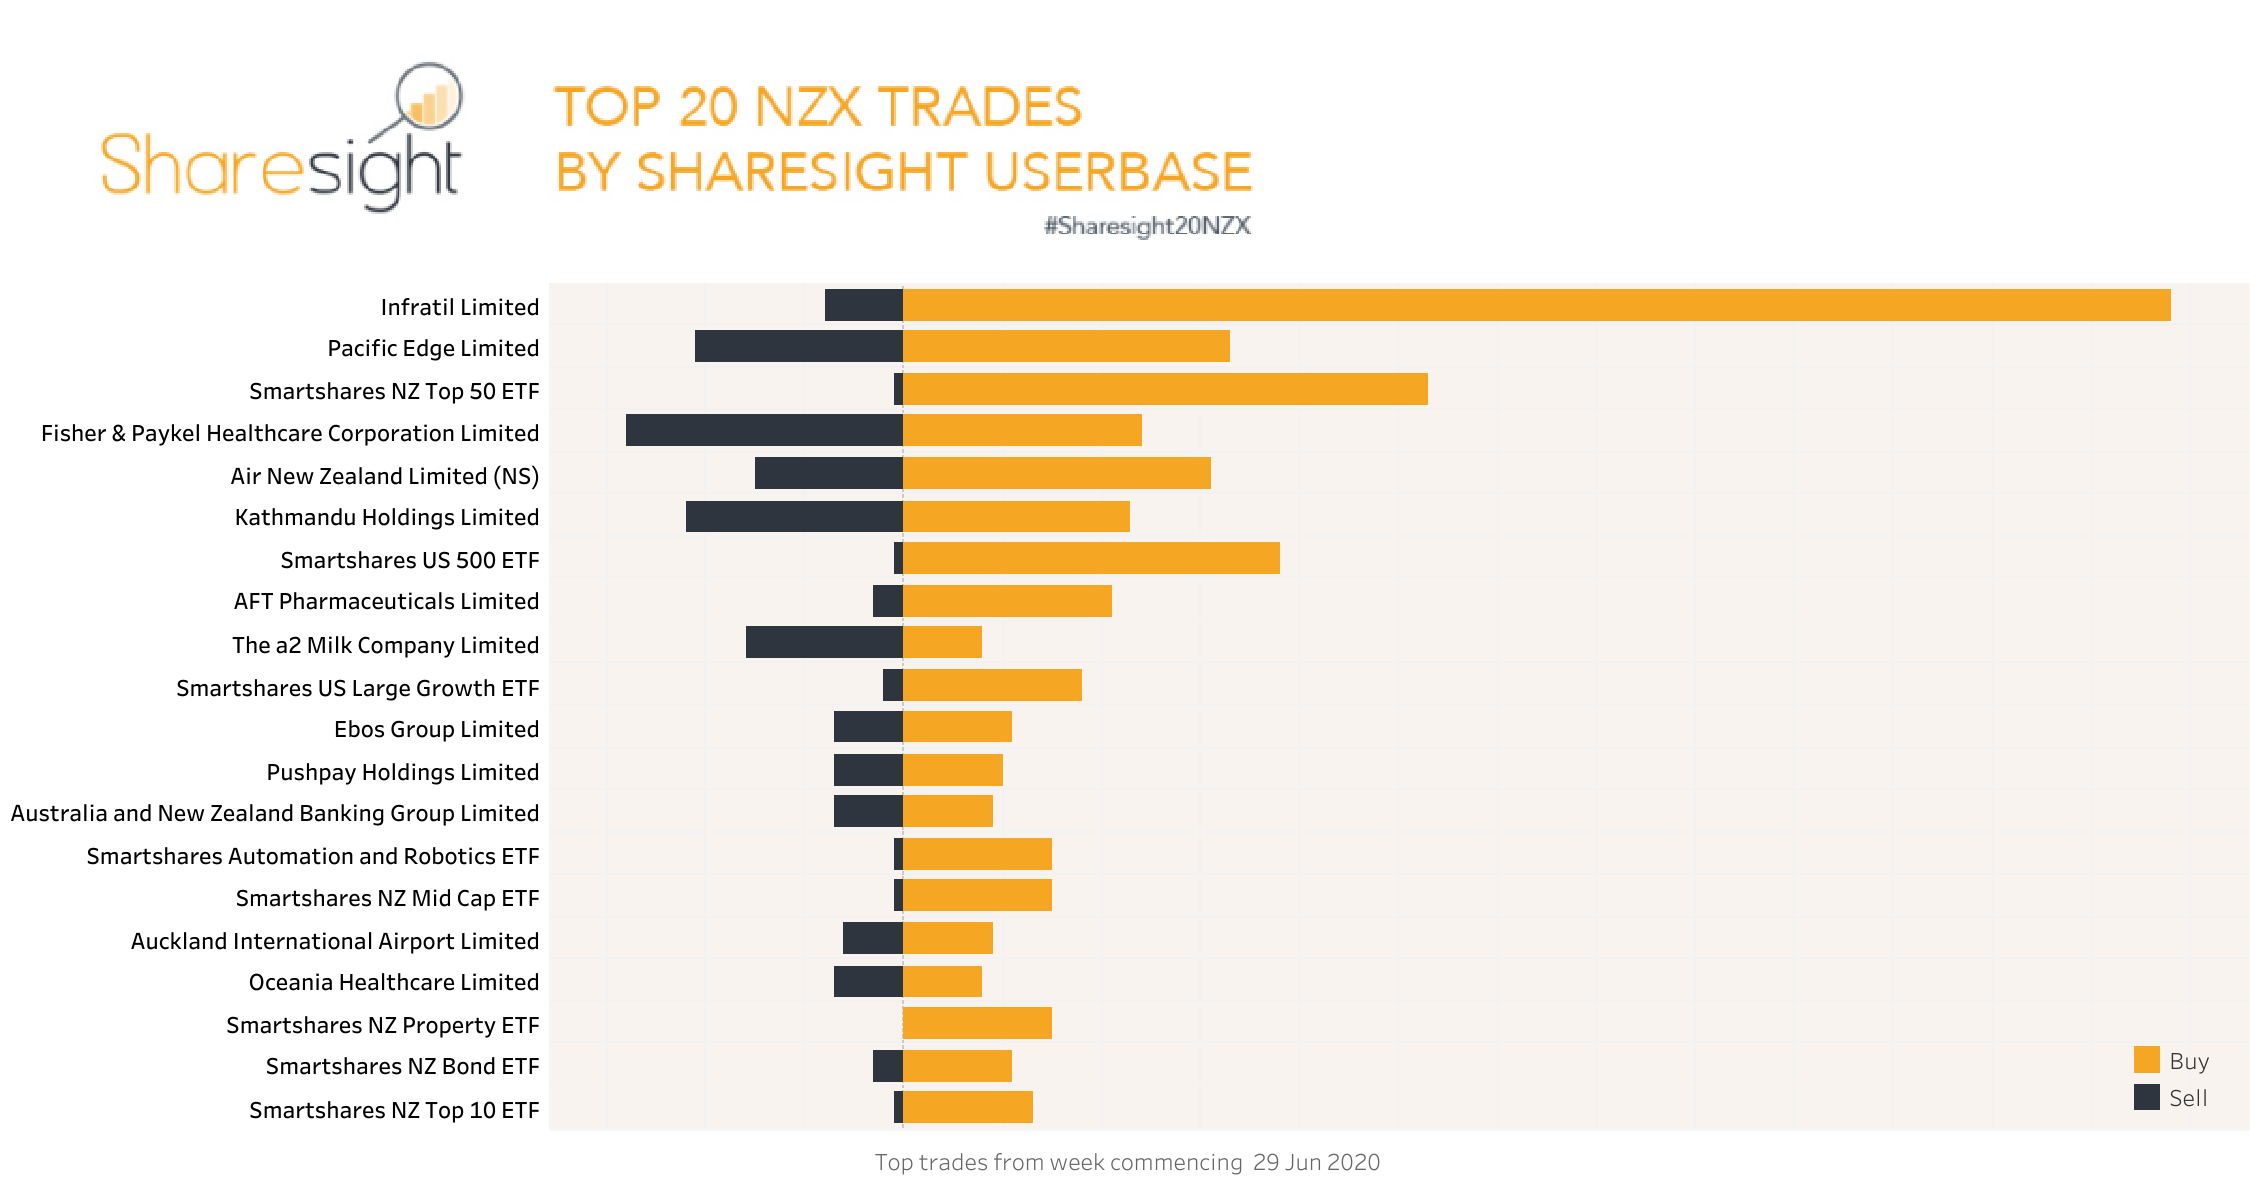 Top20 NZX trades July 6th 2020